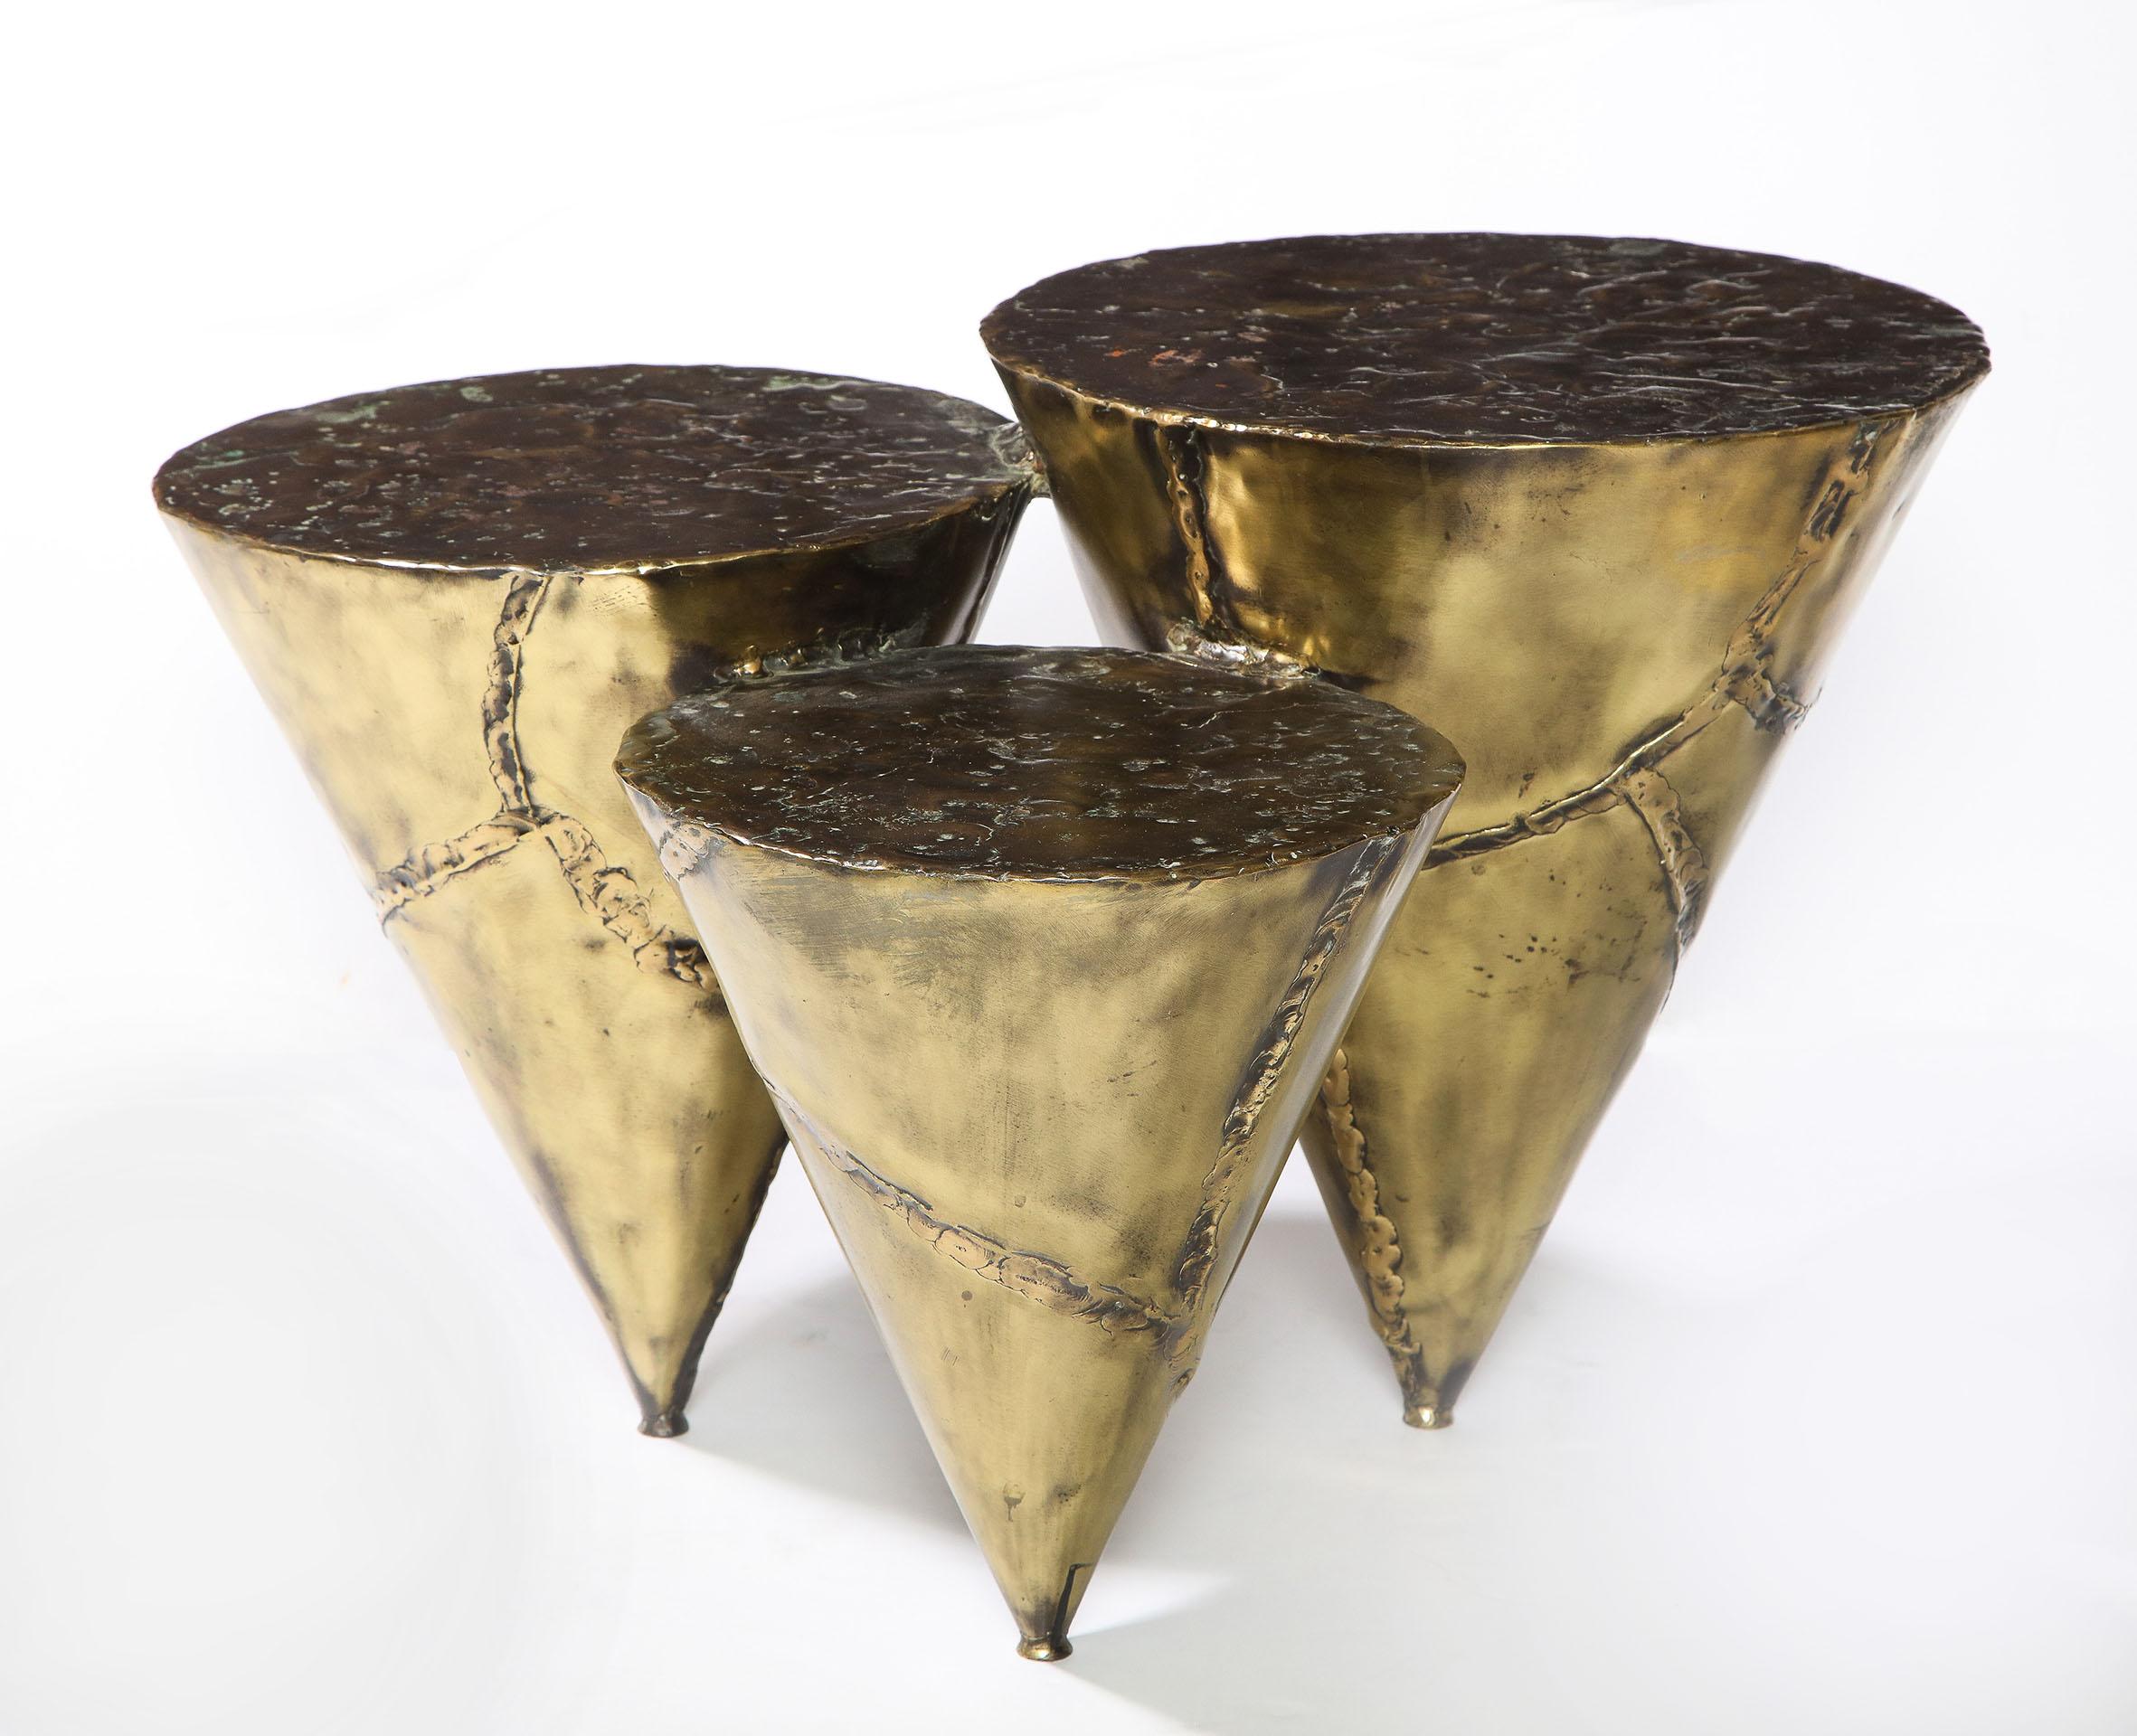 A modular multi-level cone formed coffee table in fabricated brass and bronze. 
Signed: Silas Seandel.